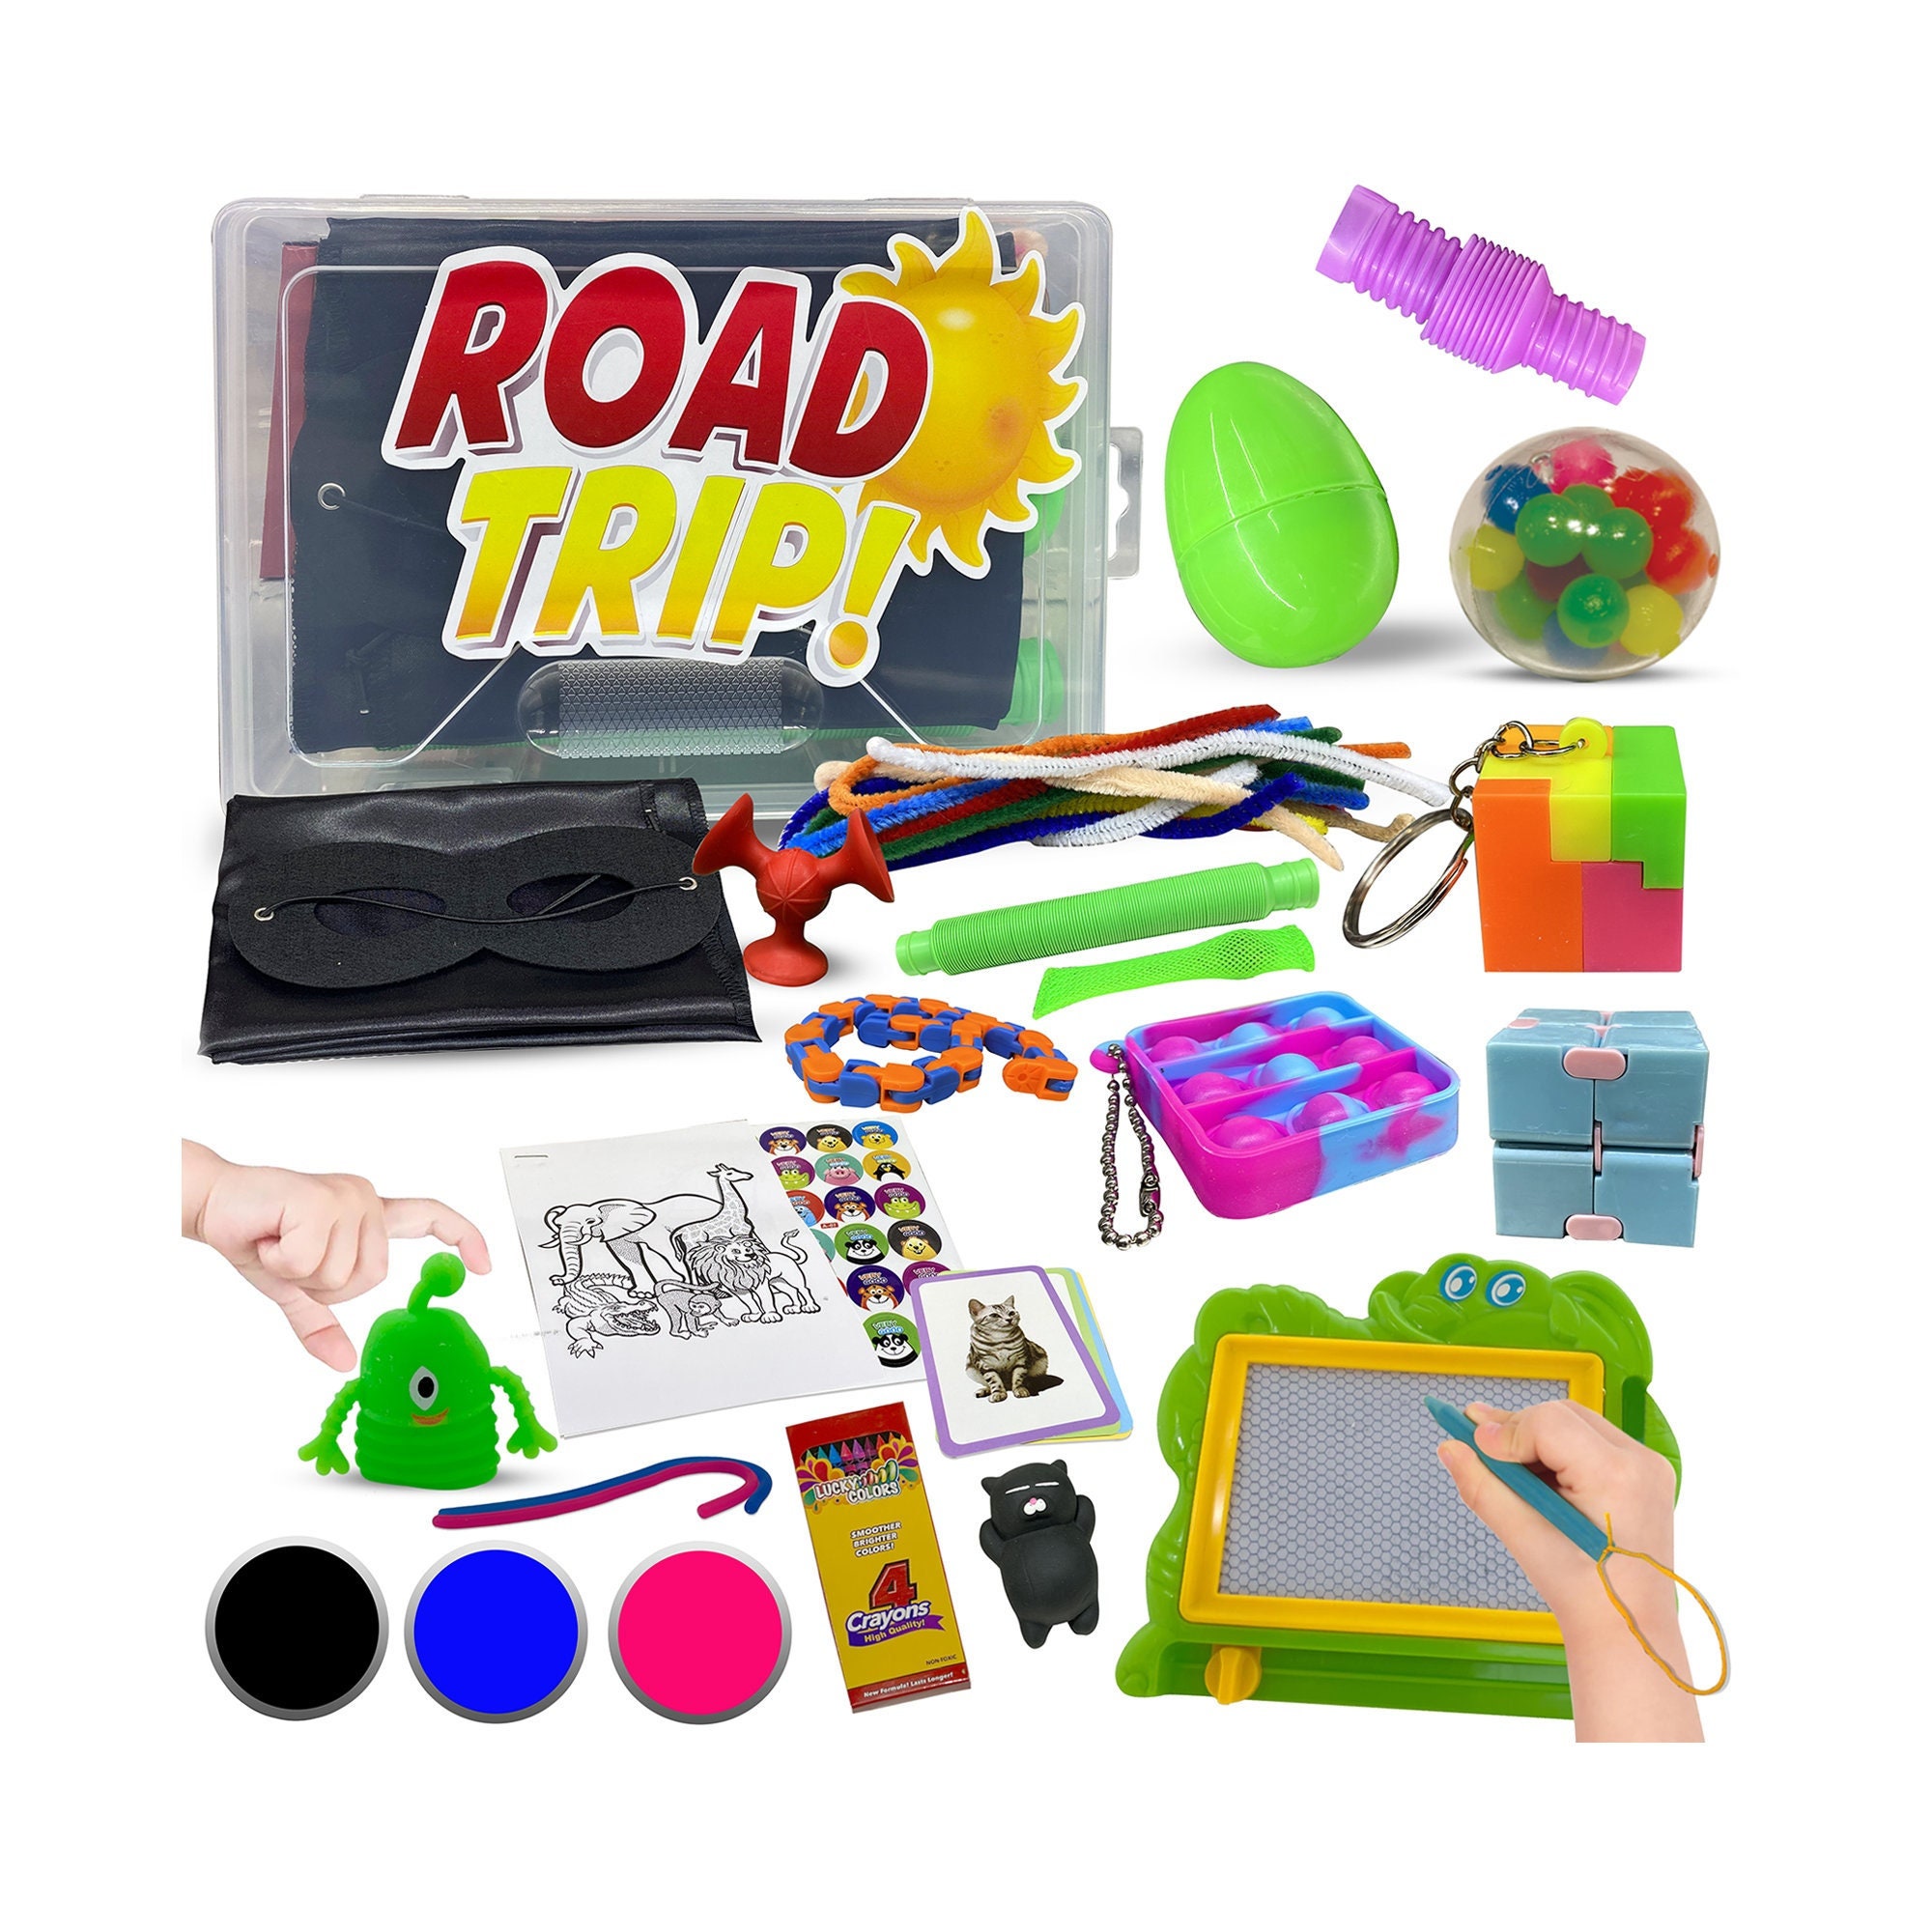 Kids Coloring Art Kit for Airplane, Car Ride, Road Trip, Travel Table Top  Easel Art Busy Box Includes Crayola Art Supplies & Coloring Pages 